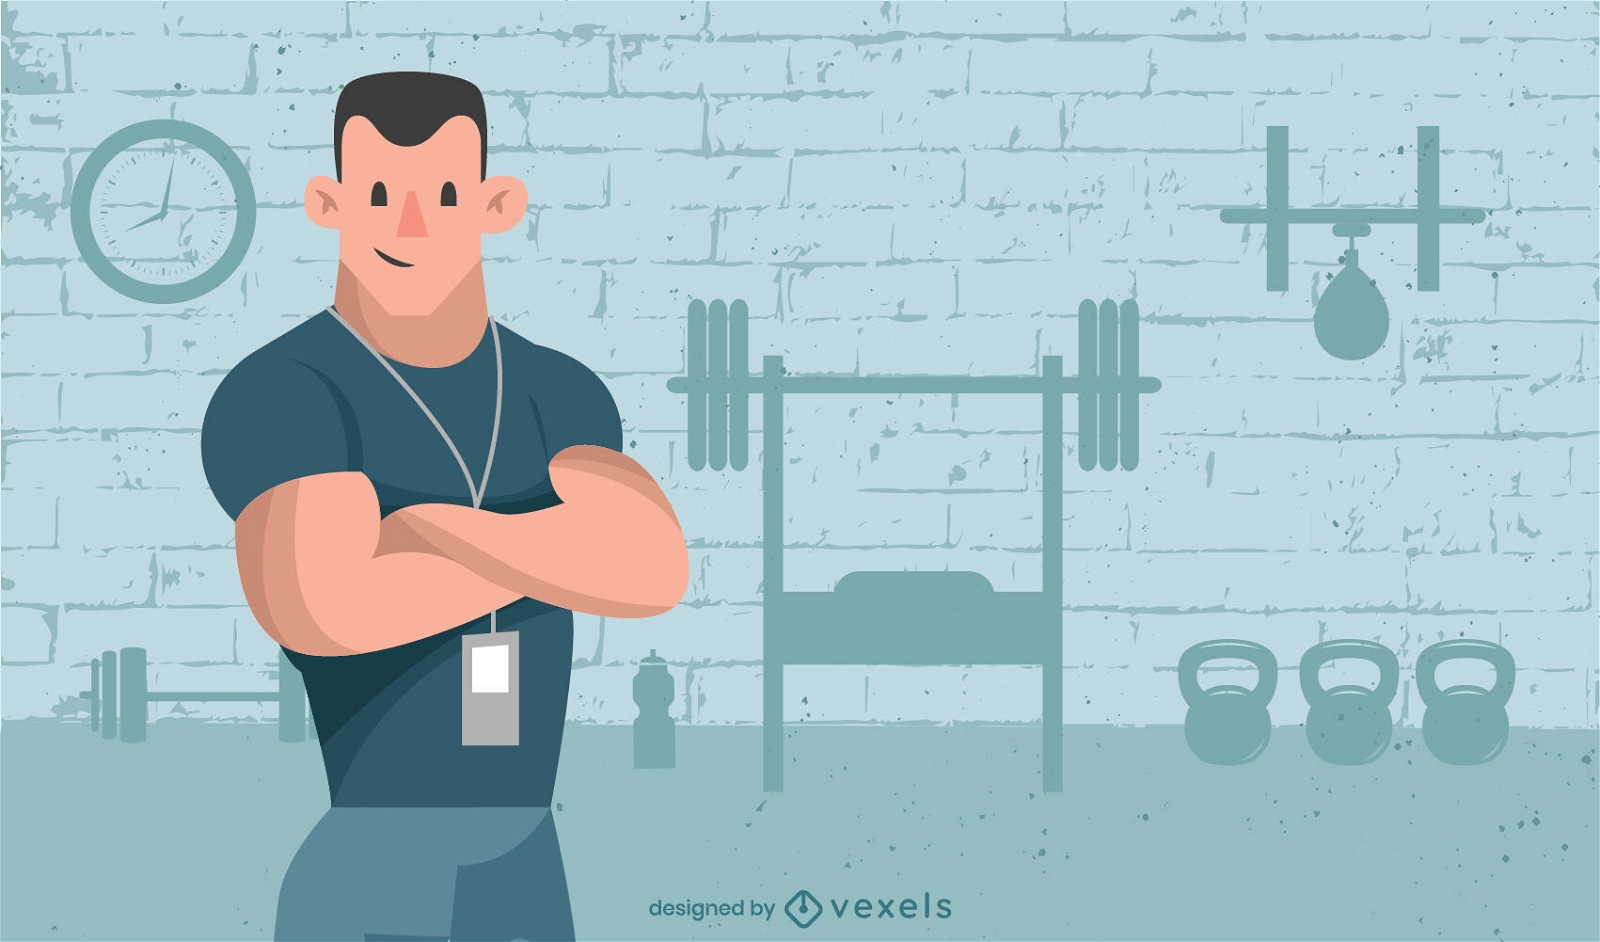 Personal trainer at gym illustration